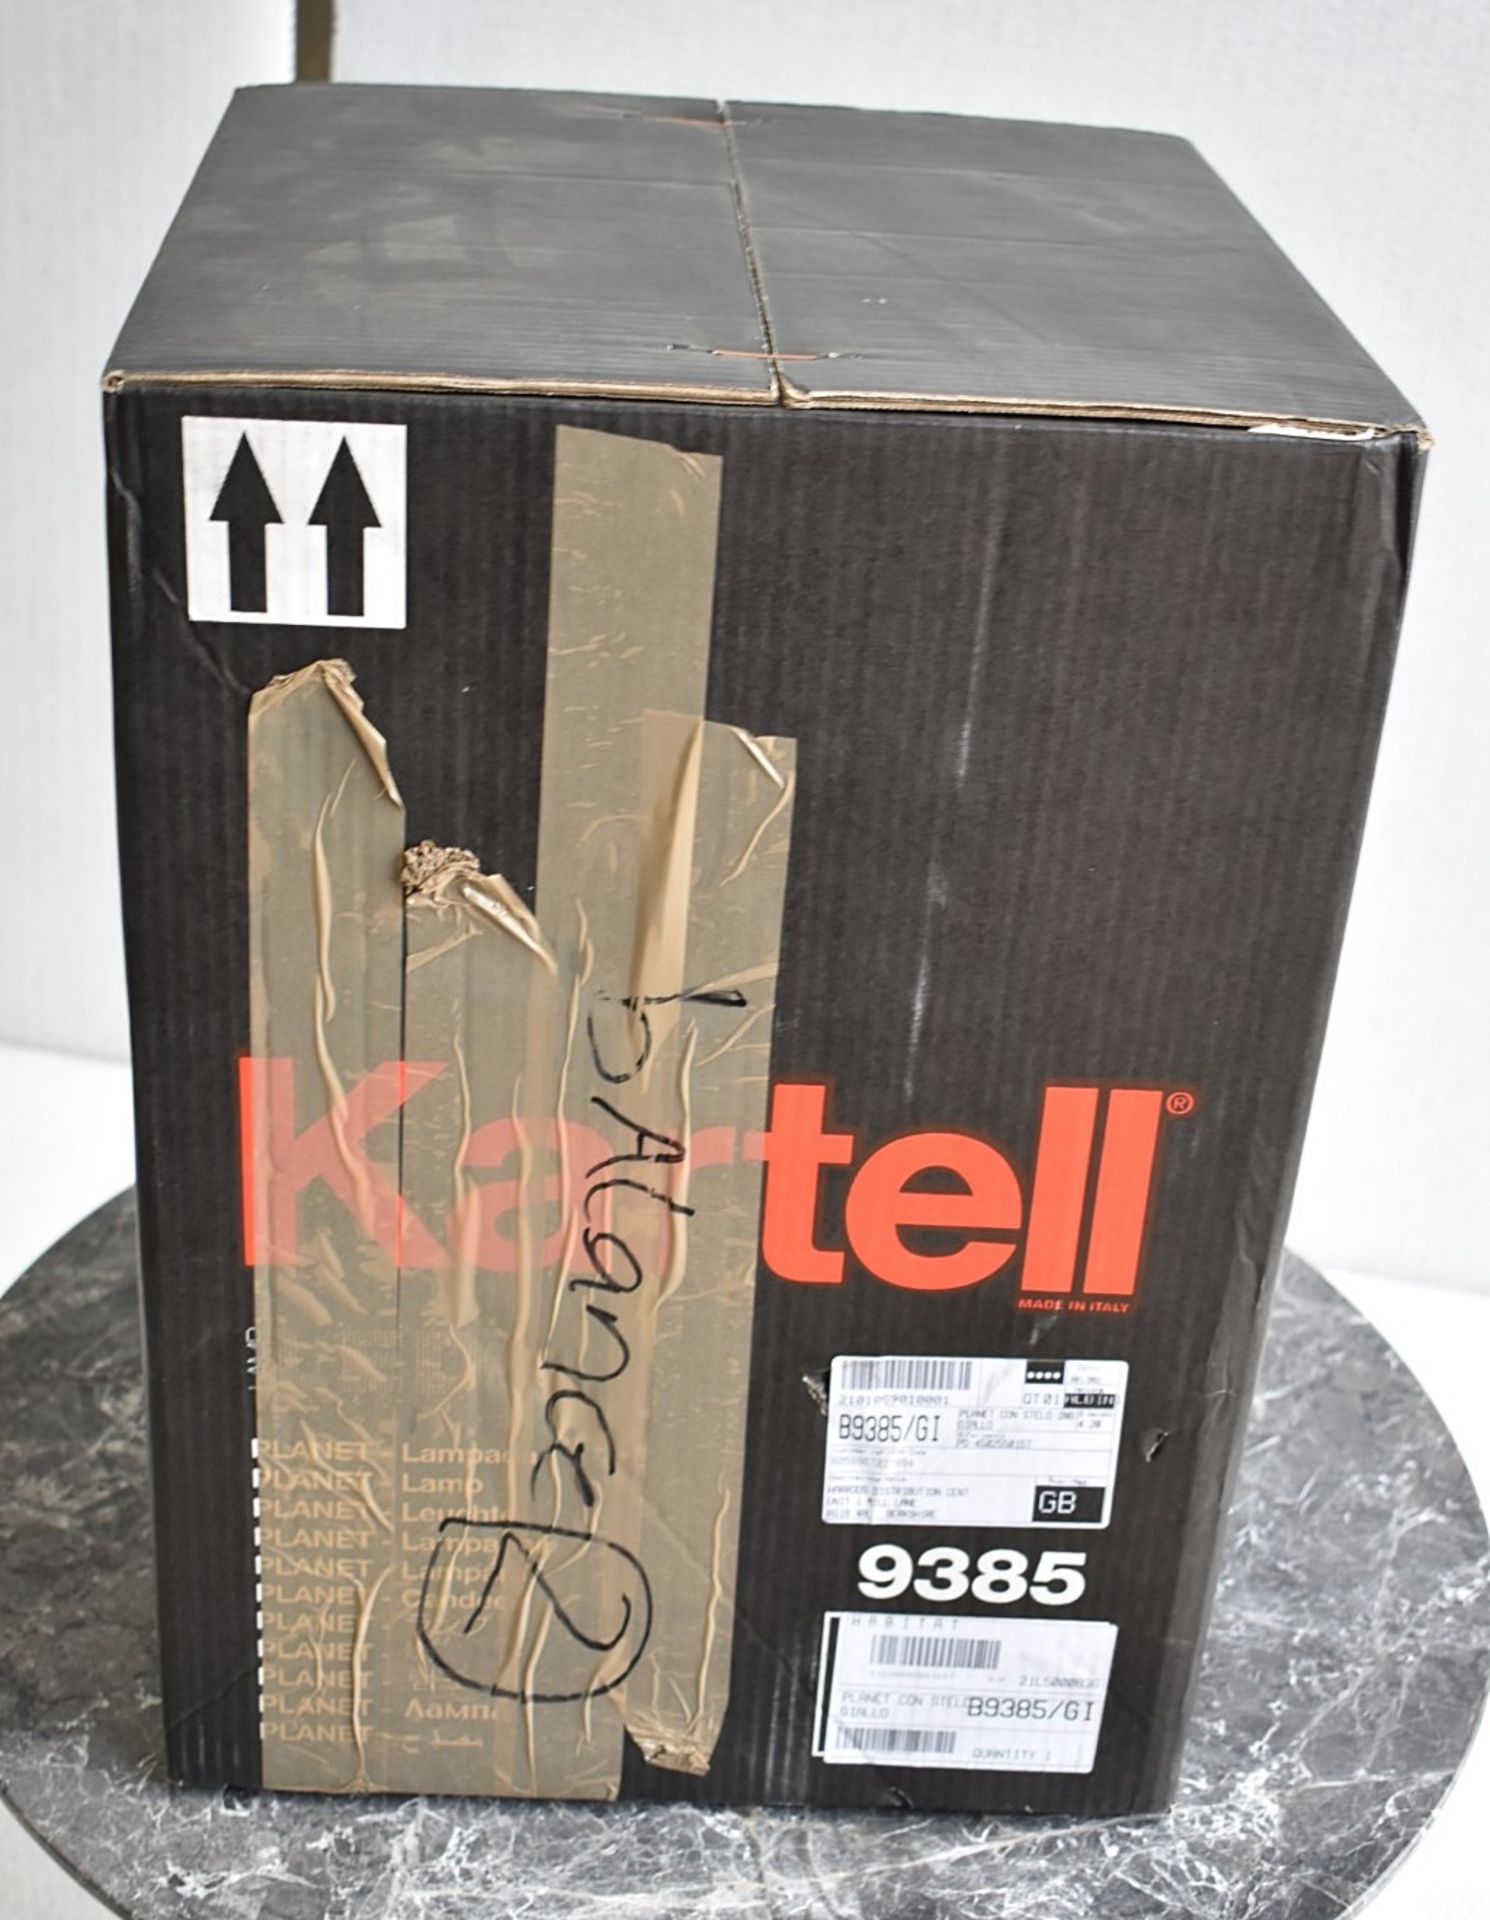 1 x KARTELL 'Planet' Designer Table Lamp In Yellow - Sealed Boxed Stock - Original RRP £524.00 - Image 2 of 8